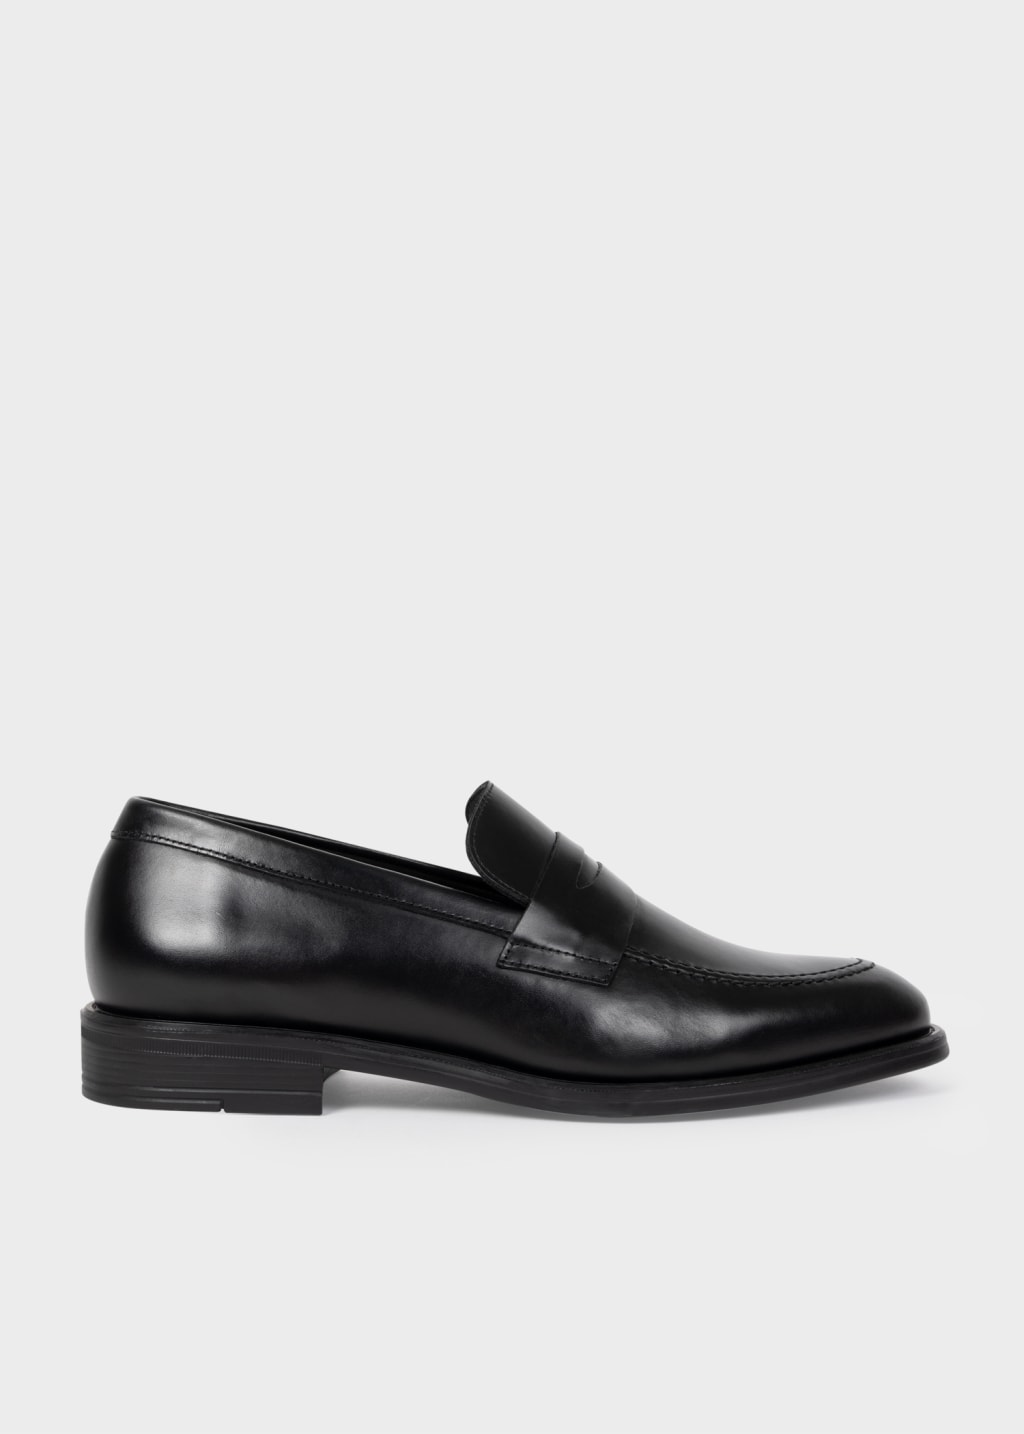 Men's Black Leather 'Remi' Loafers